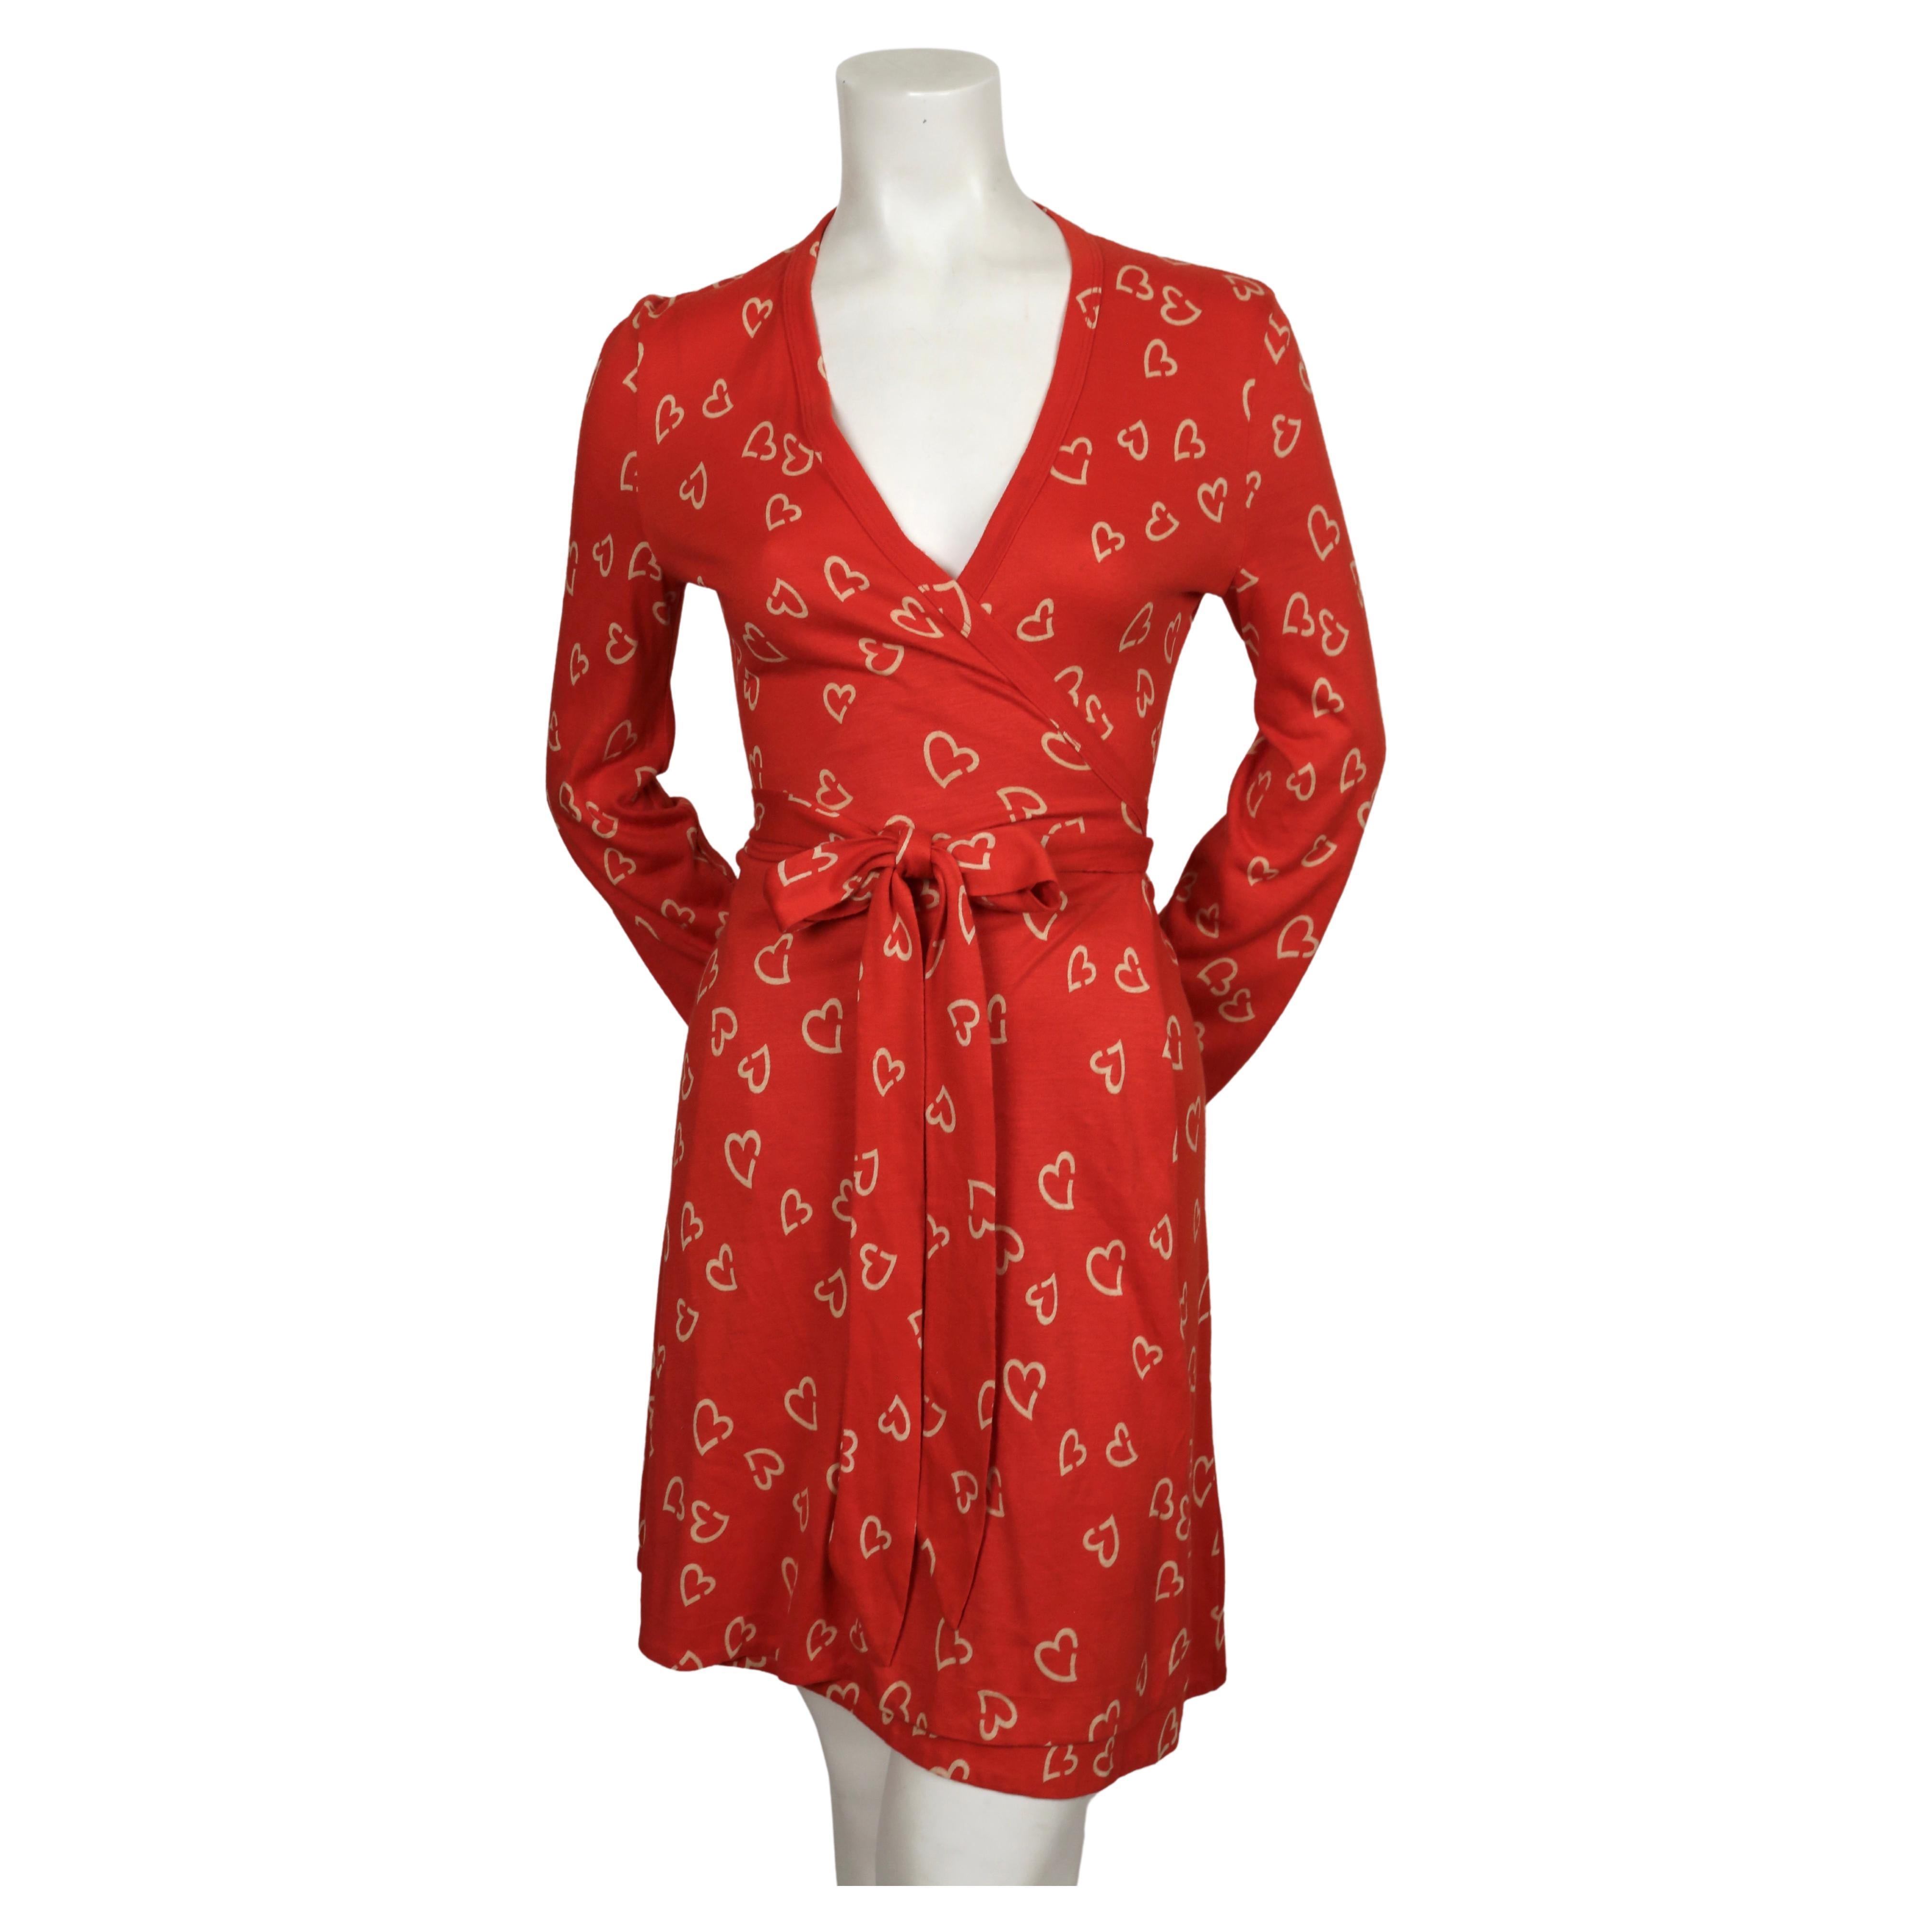 Red and off-white, heart-printed wrap dress by Diane Von Furstenberg dating to the 1970's. Vintage size 10 however this fits much smaller. The dress was not clipped on the size 2 mannequin. Best fits a US 4-6.  Approximate measurements: shoulder